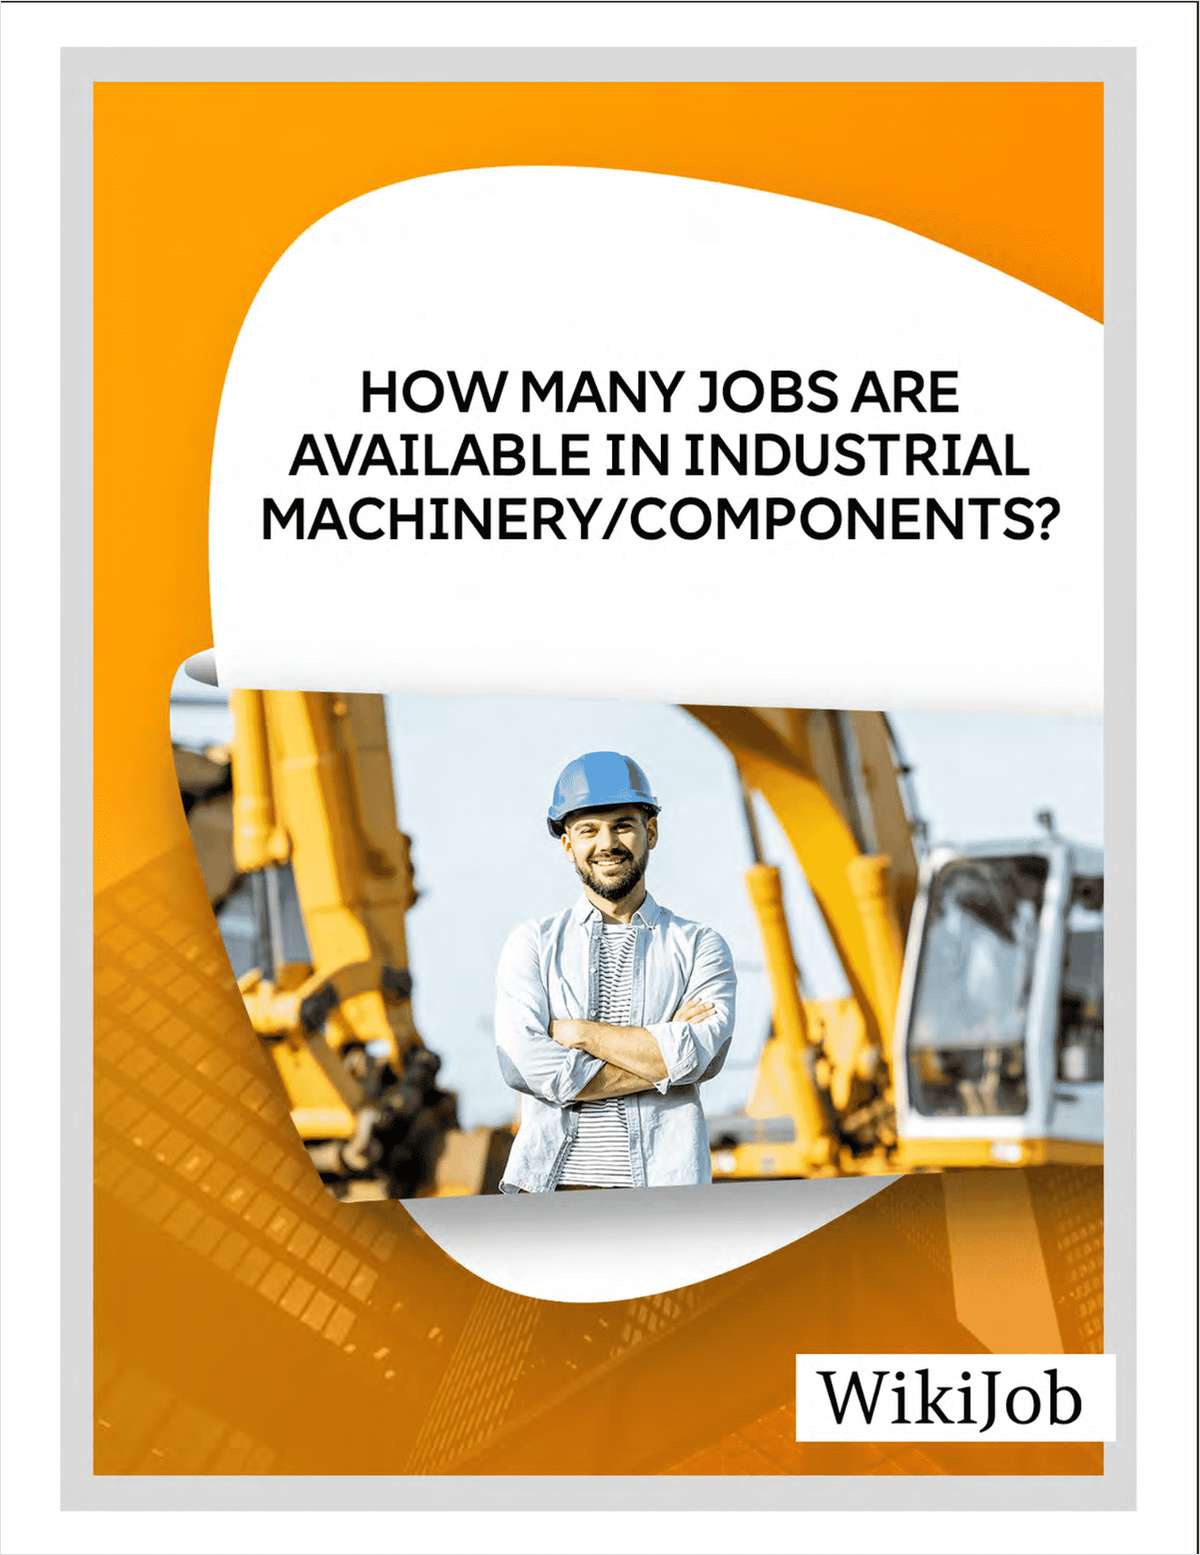 How Many Jobs Are Available in Industrial Machinery/Components?